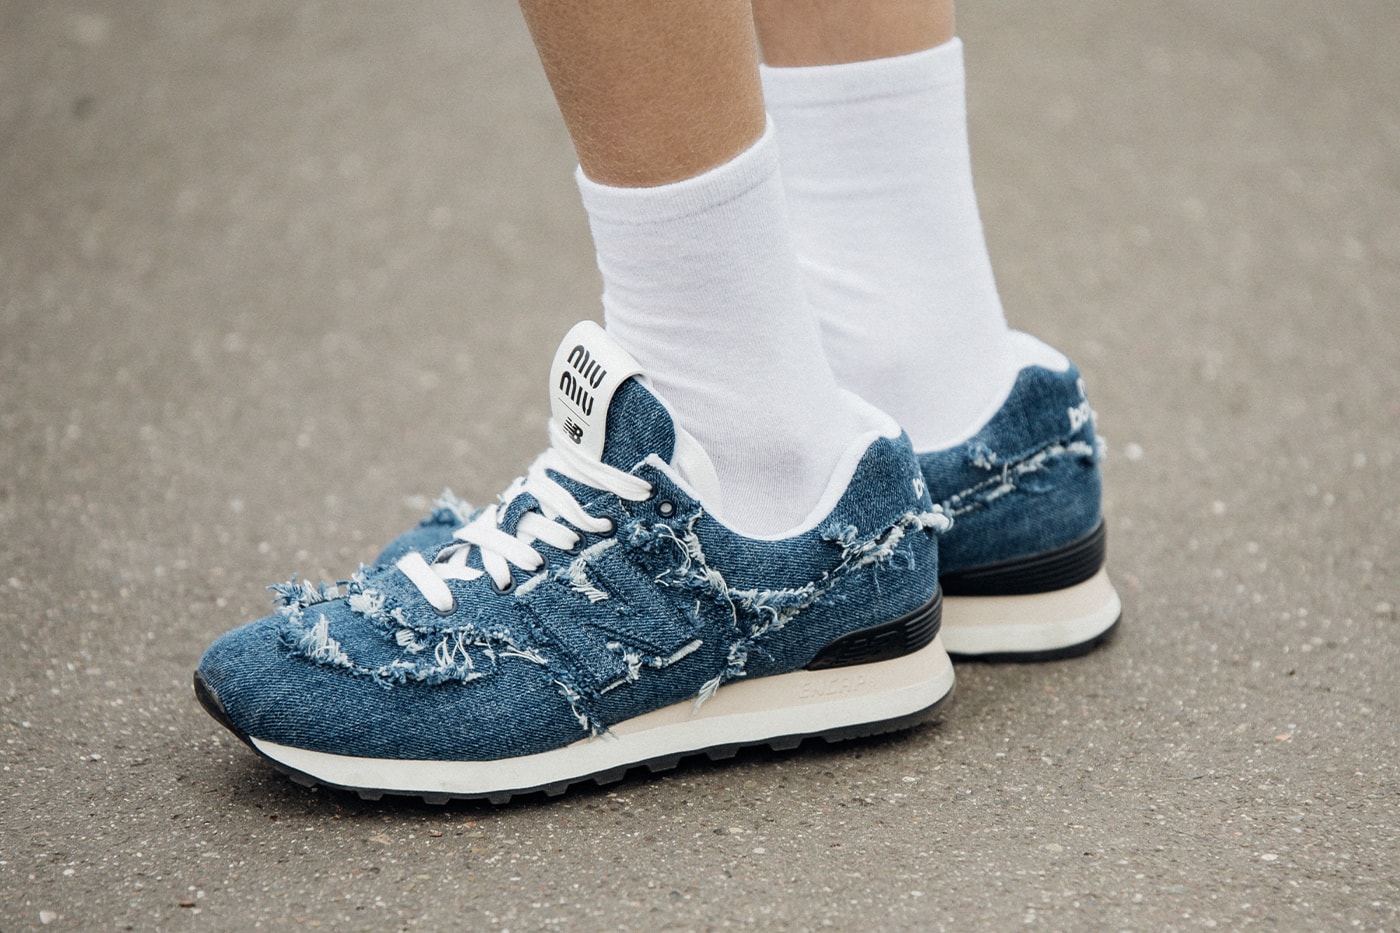 How to Shop the Miu Miu x New Balance Sneakers for Spring 2023